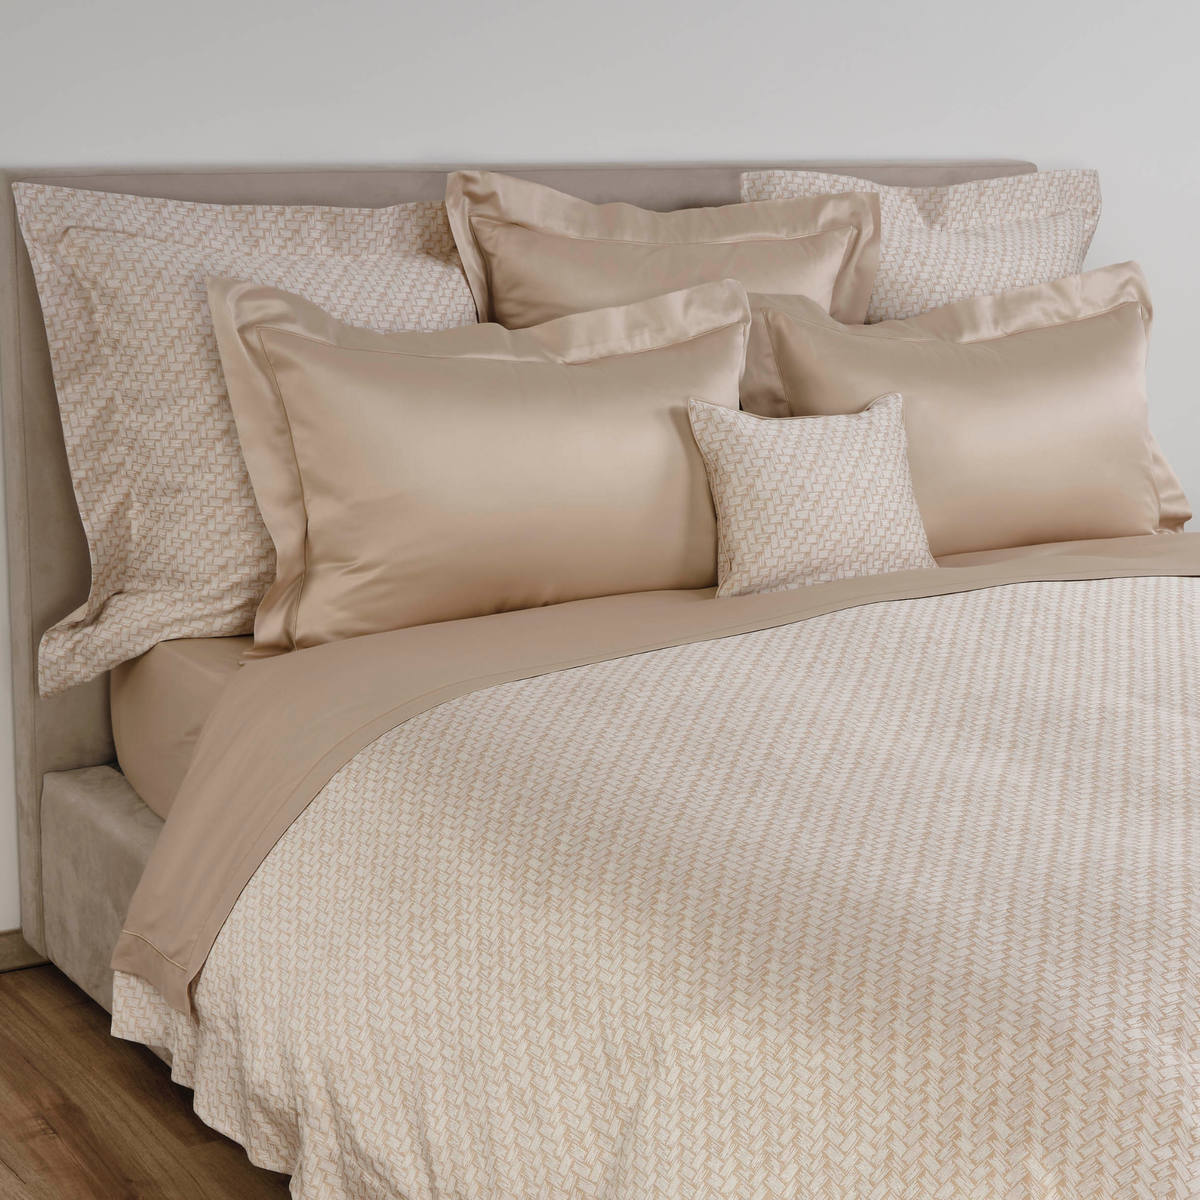 Full Bed in Celso de Lemos Twined Collection in Powder Color